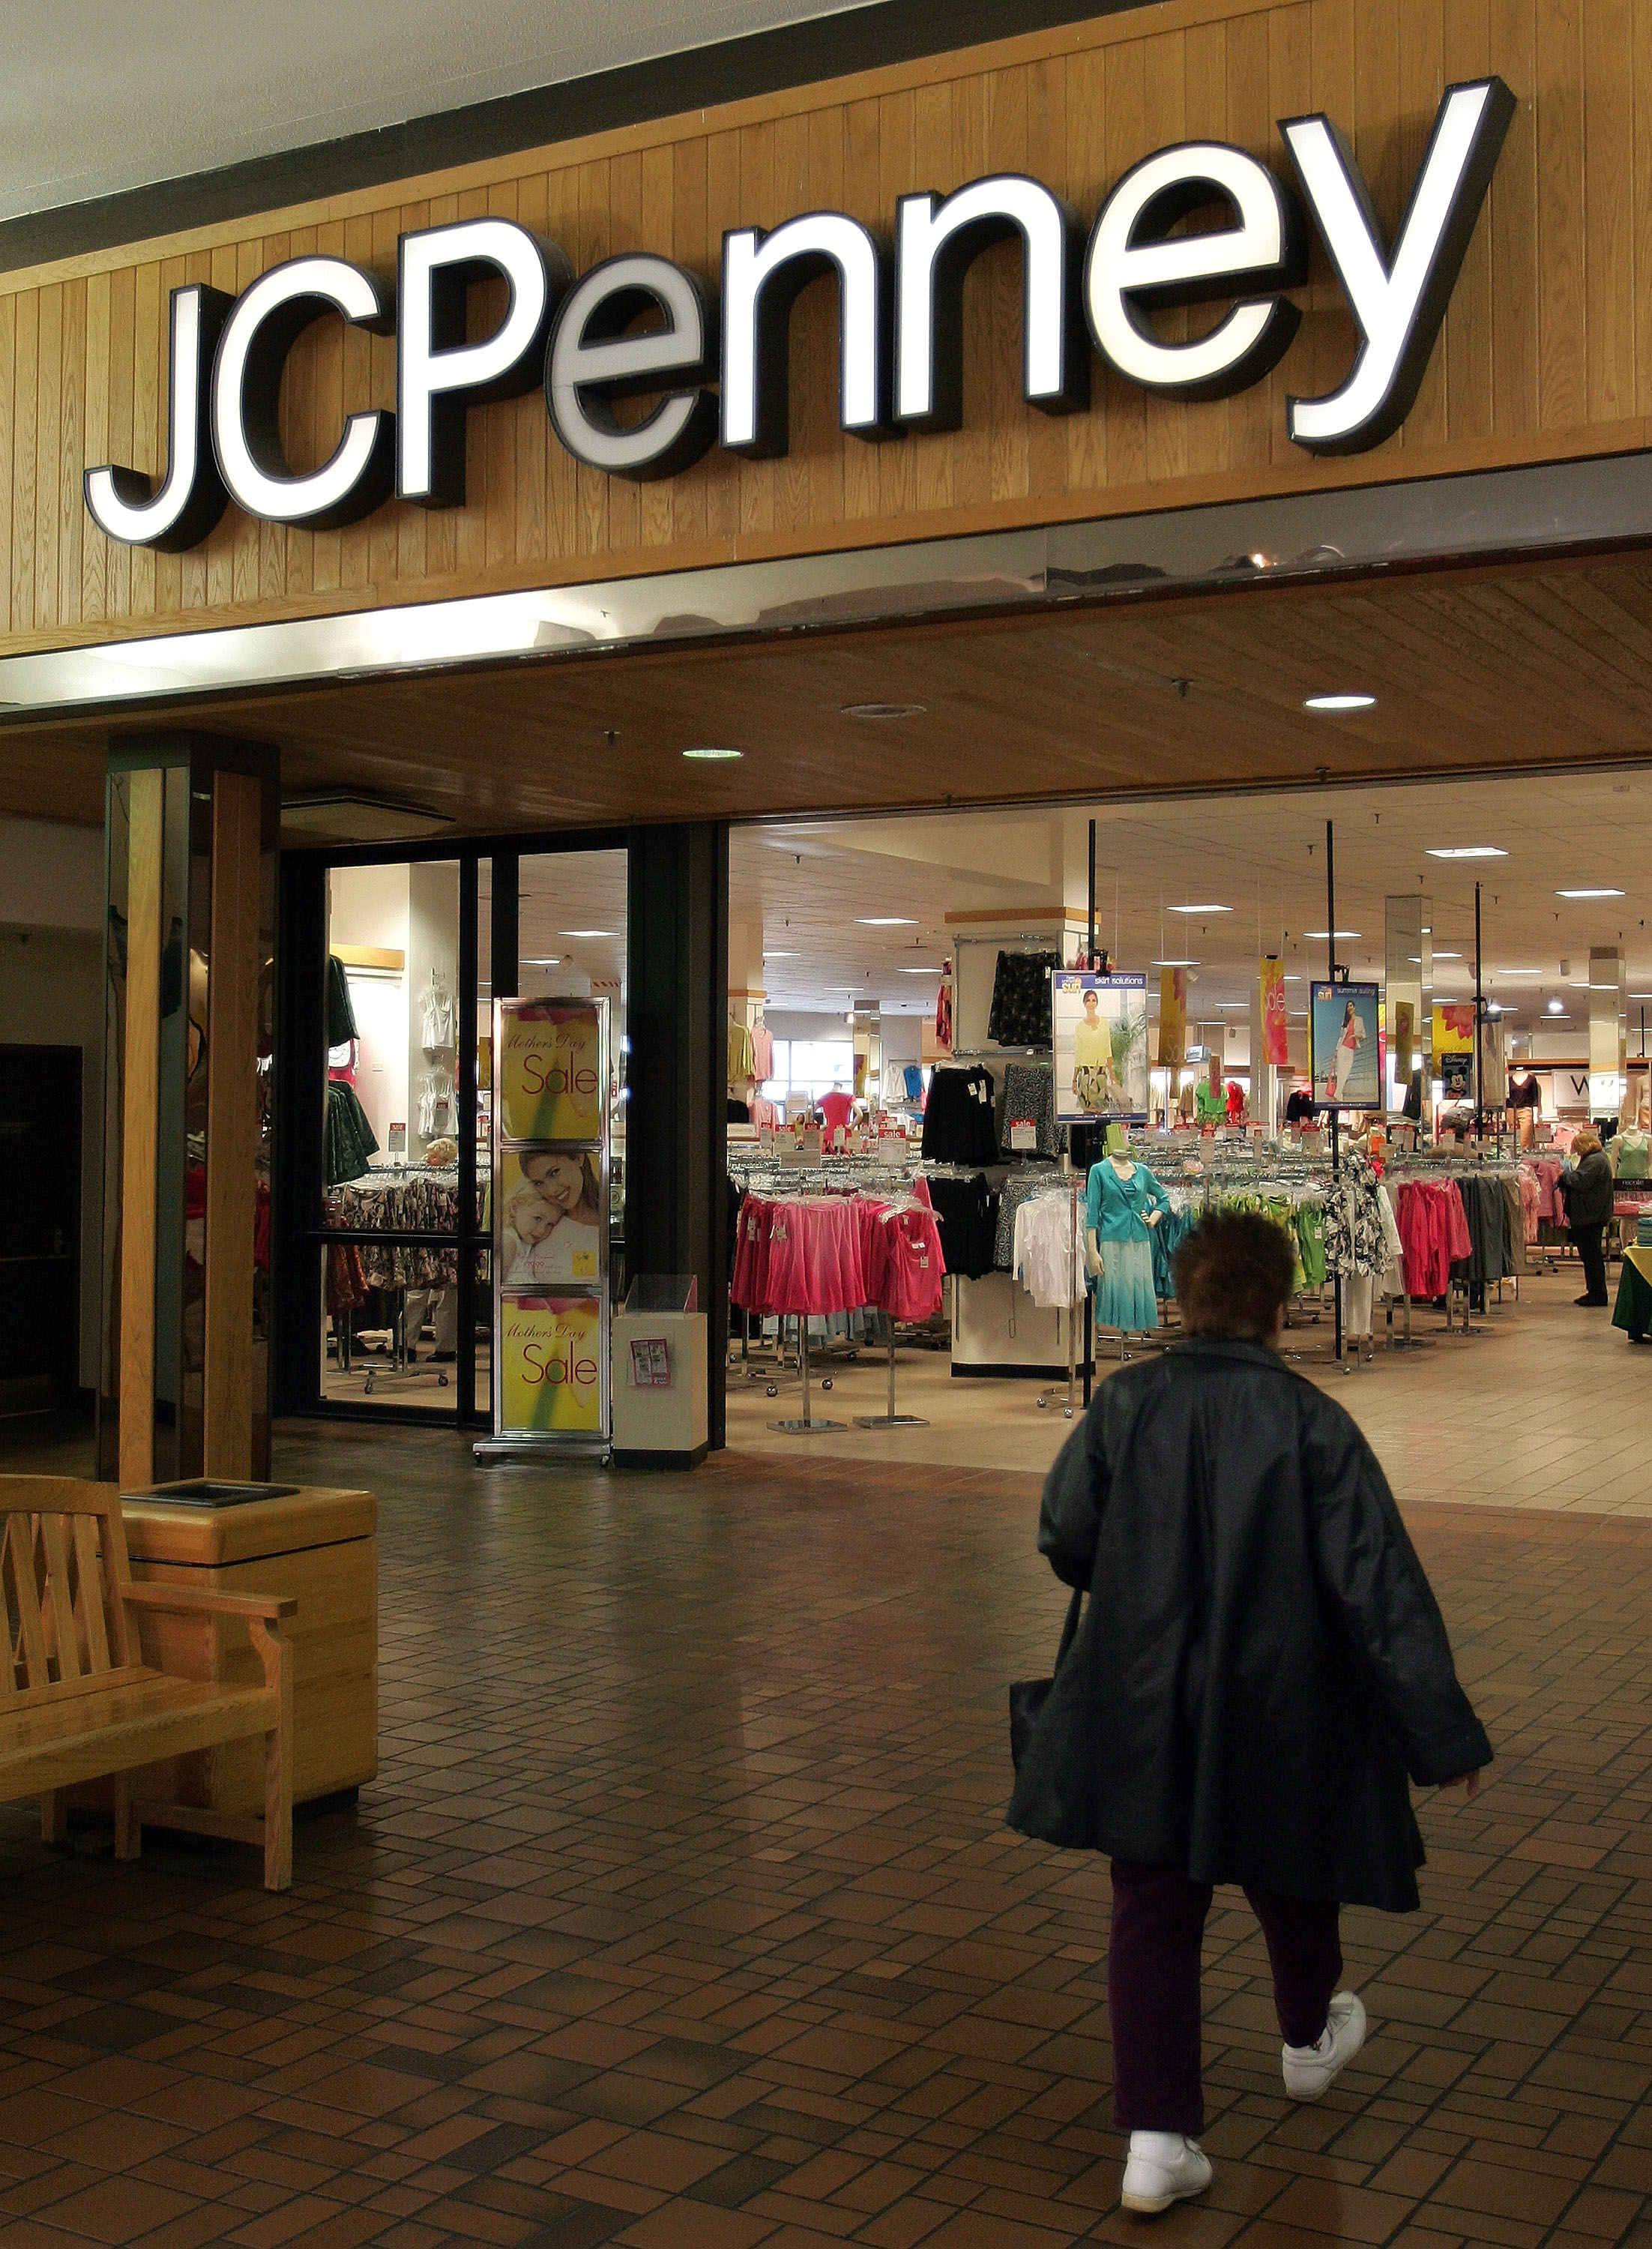 A woman walks toward the entrance of a JCPenney store May 3, 2005 in Niles, Illinois. (Photo by Tim Boyle/Getty Images)